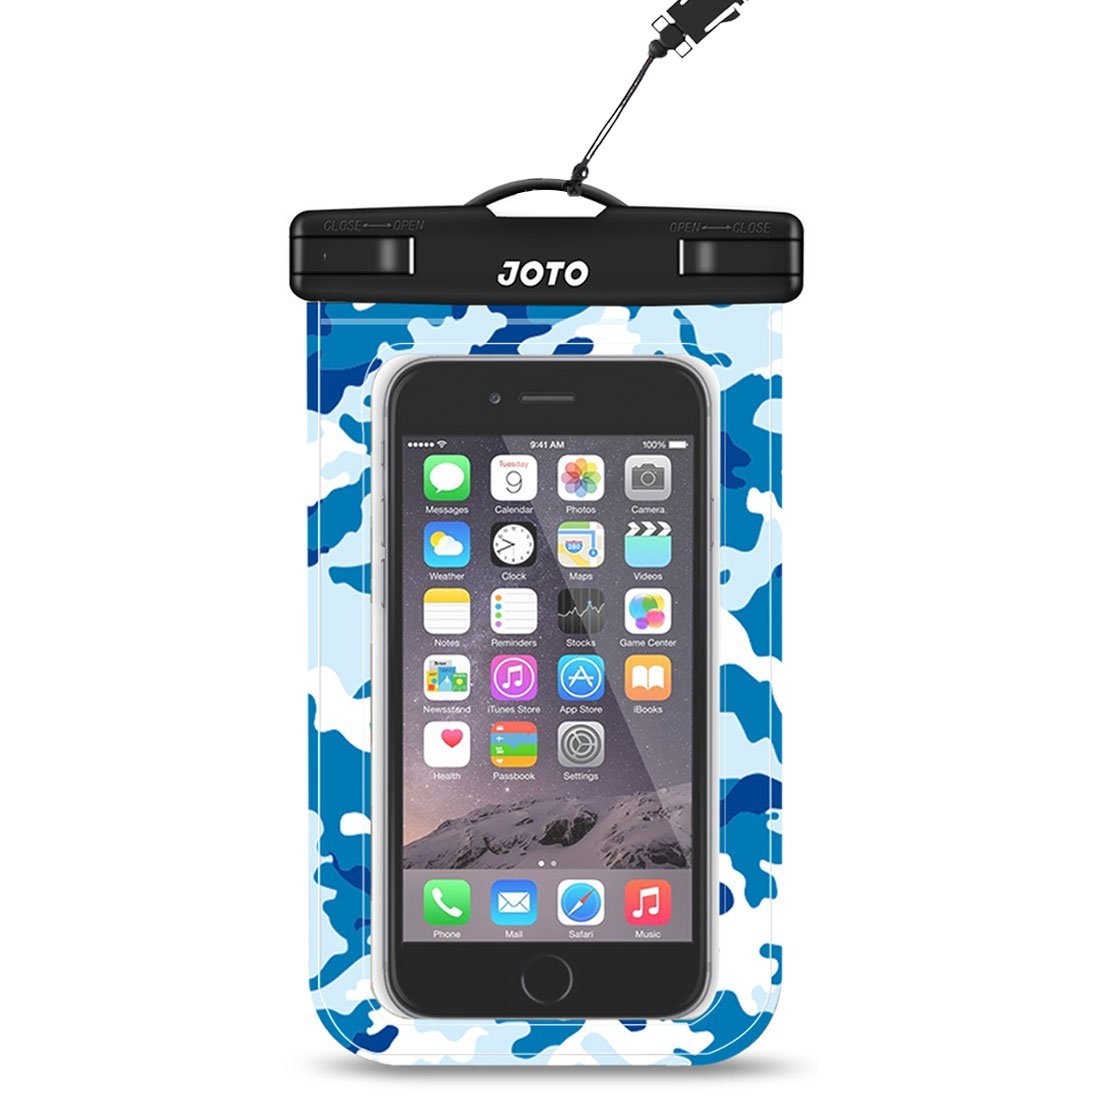 Universal Waterproof Pouch Phone Dry Bag JOTO camoblue